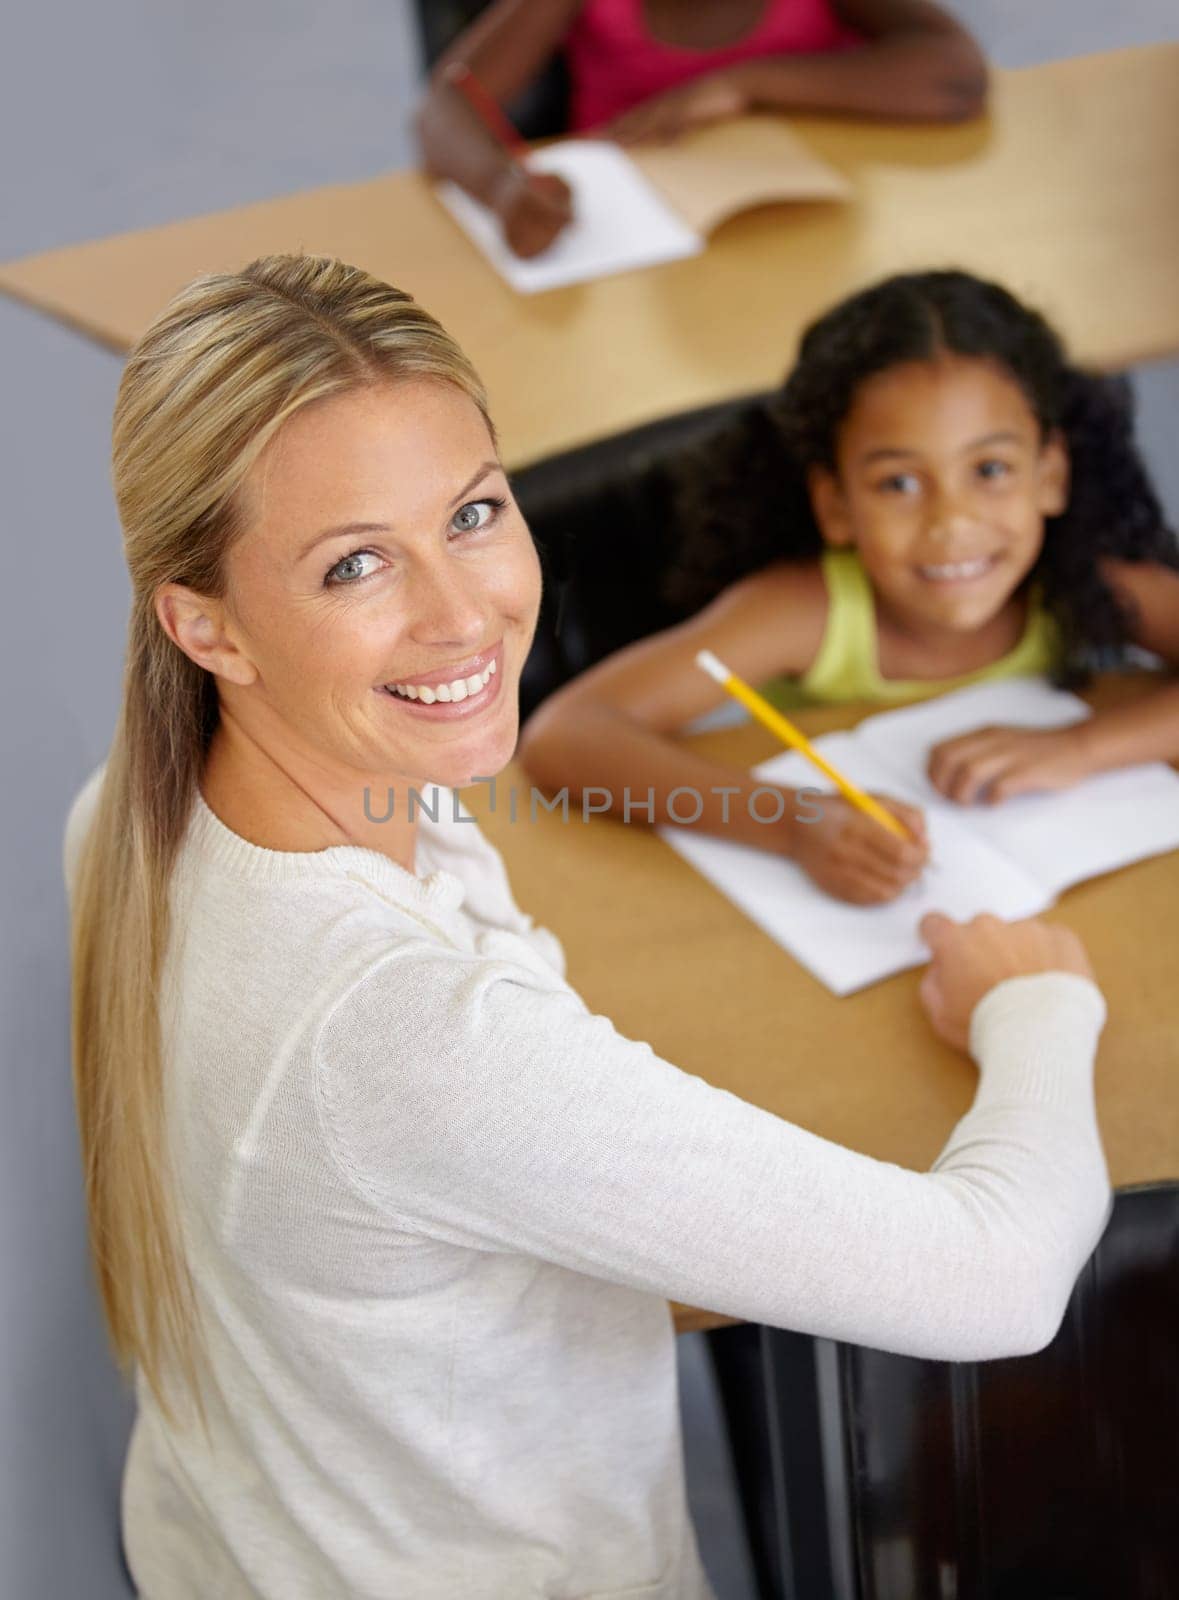 Kid, teacher and portrait in classroom studying school work for an education with support. Woman, smile and desk with child to help with reading or learning for children to work at school building